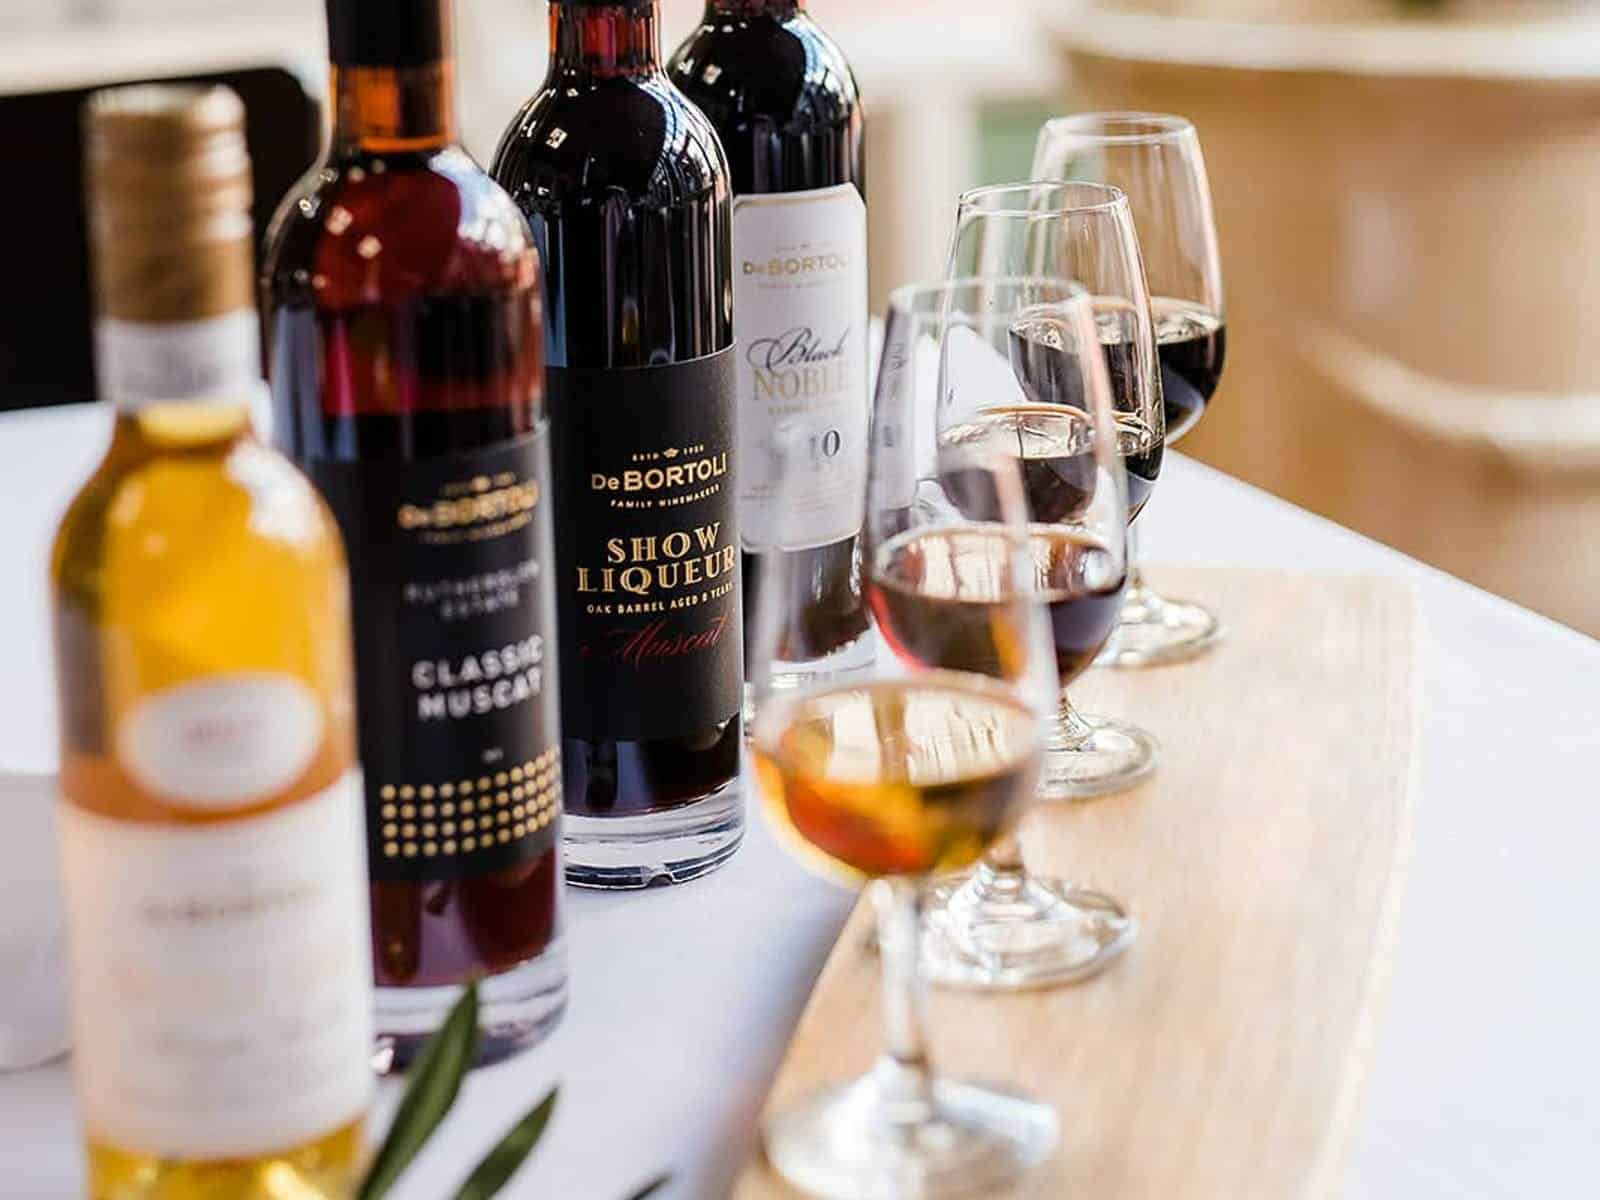 Enjoy four wines including two Muscats and two styles of the iconic Noble One.